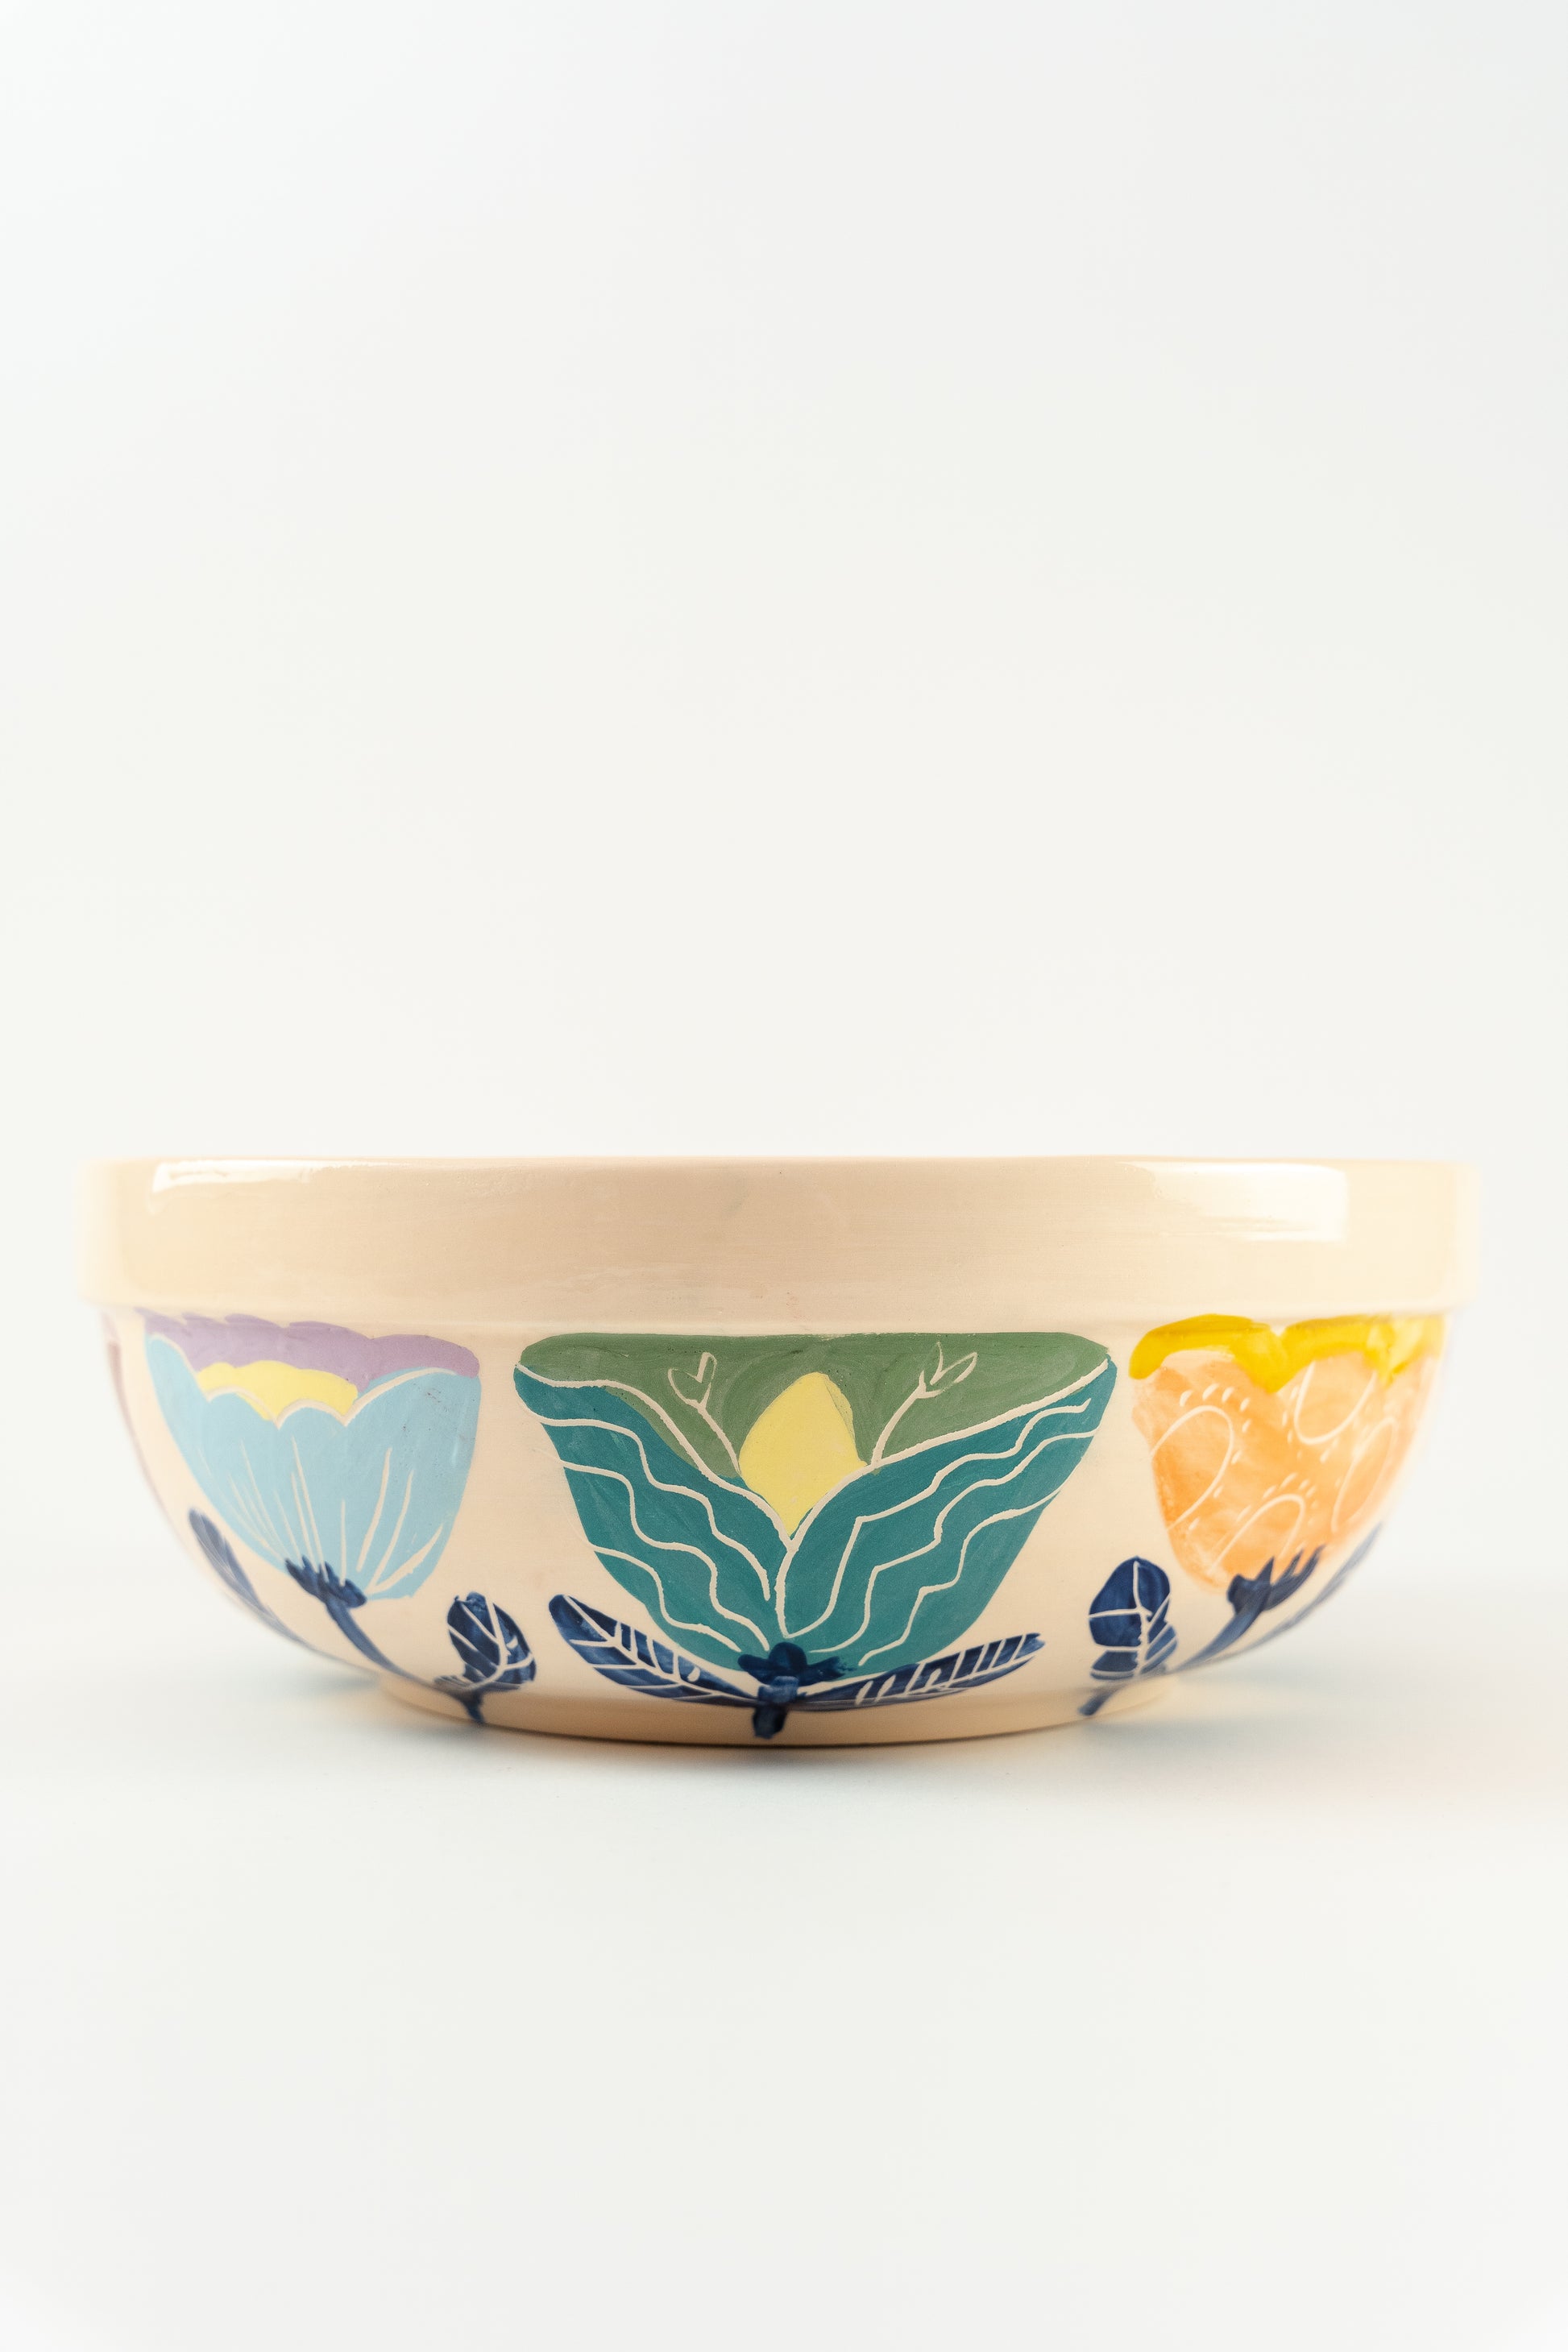 The side of the Handmade ceramic serving bowls fpor salads, with colorful flower details and a kind face design on the bottom of the bowl